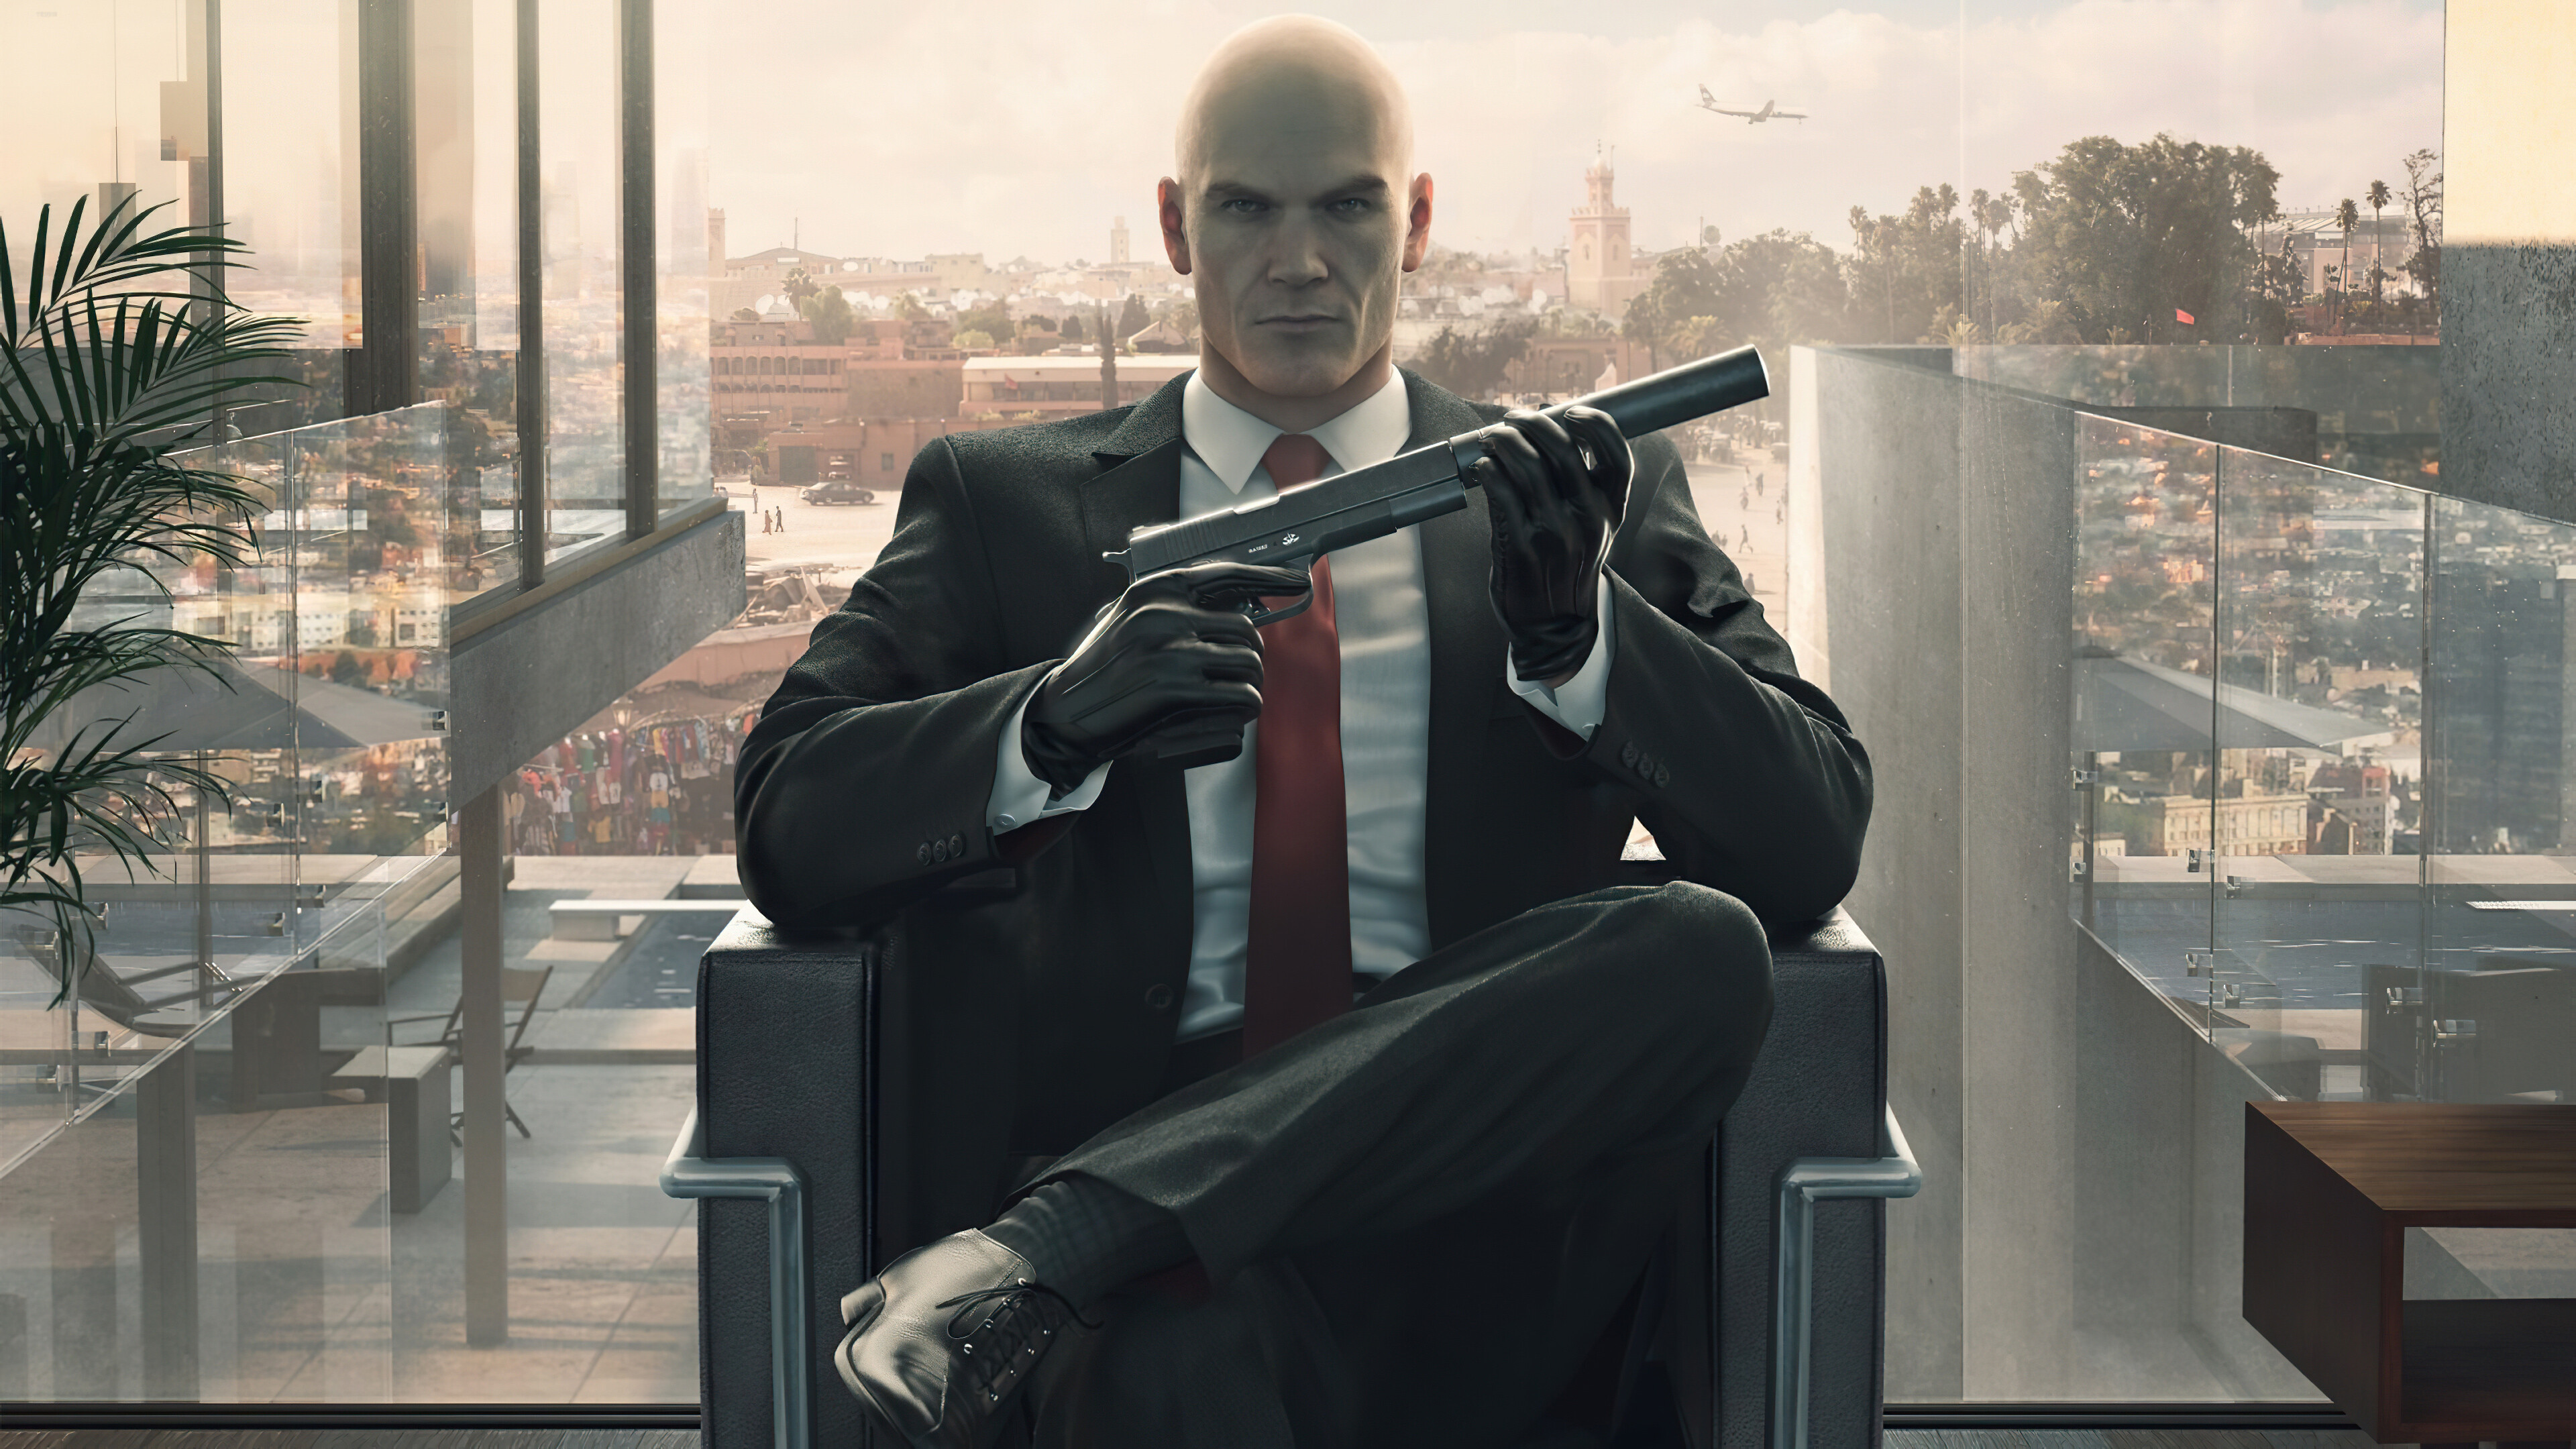 Hitman (Game): The dramatic conclusion to the World of Assassination trilogy. 3840x2160 4K Background.